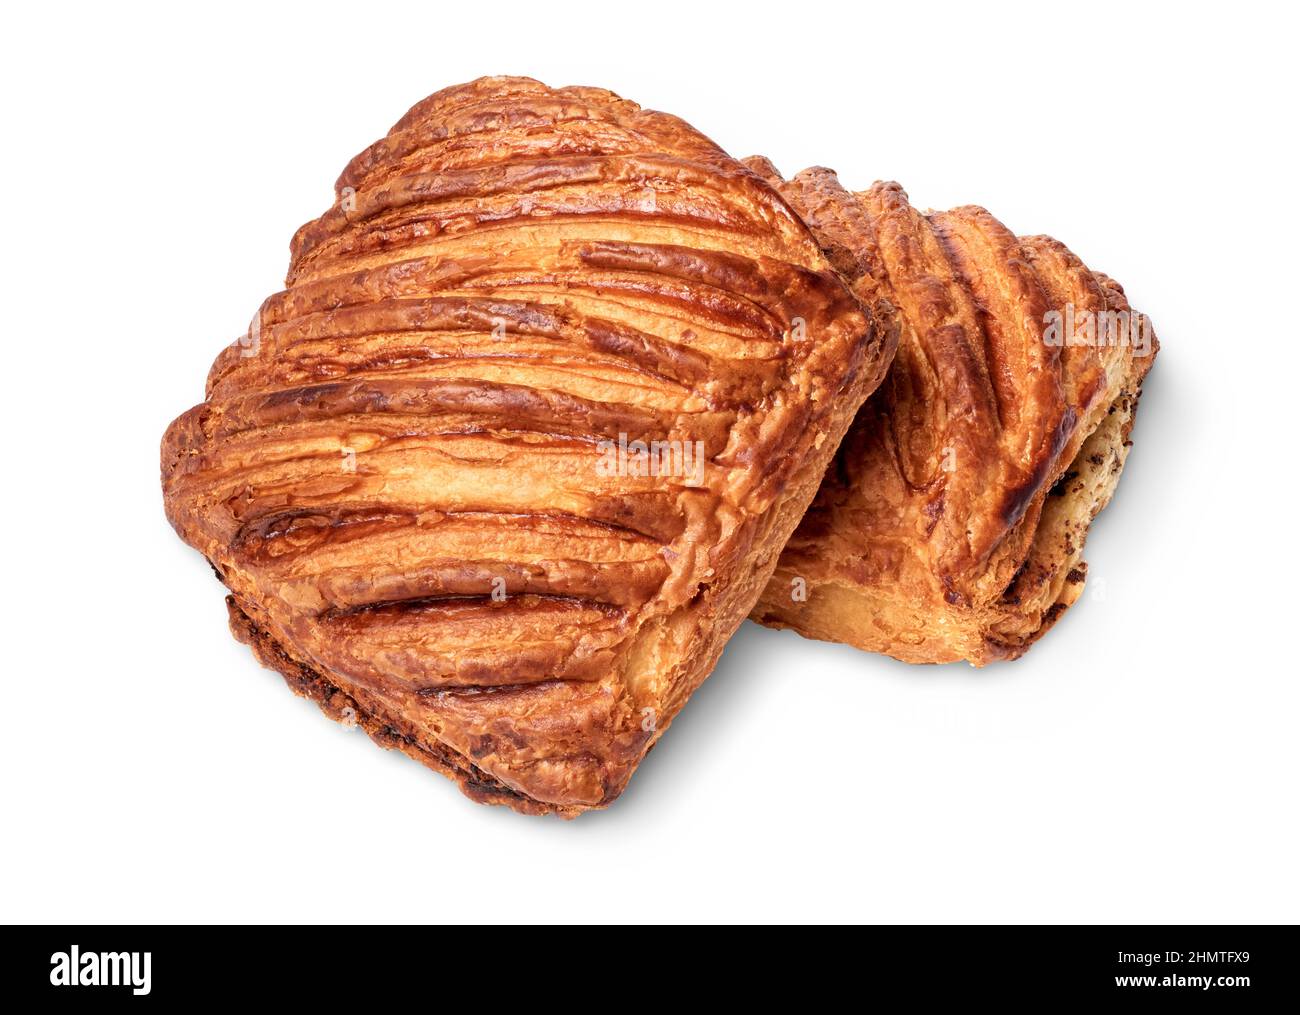 Isolated objects: traditional sweet puff pastry bun, stuffed with poppy seeds, on white background Stock Photo